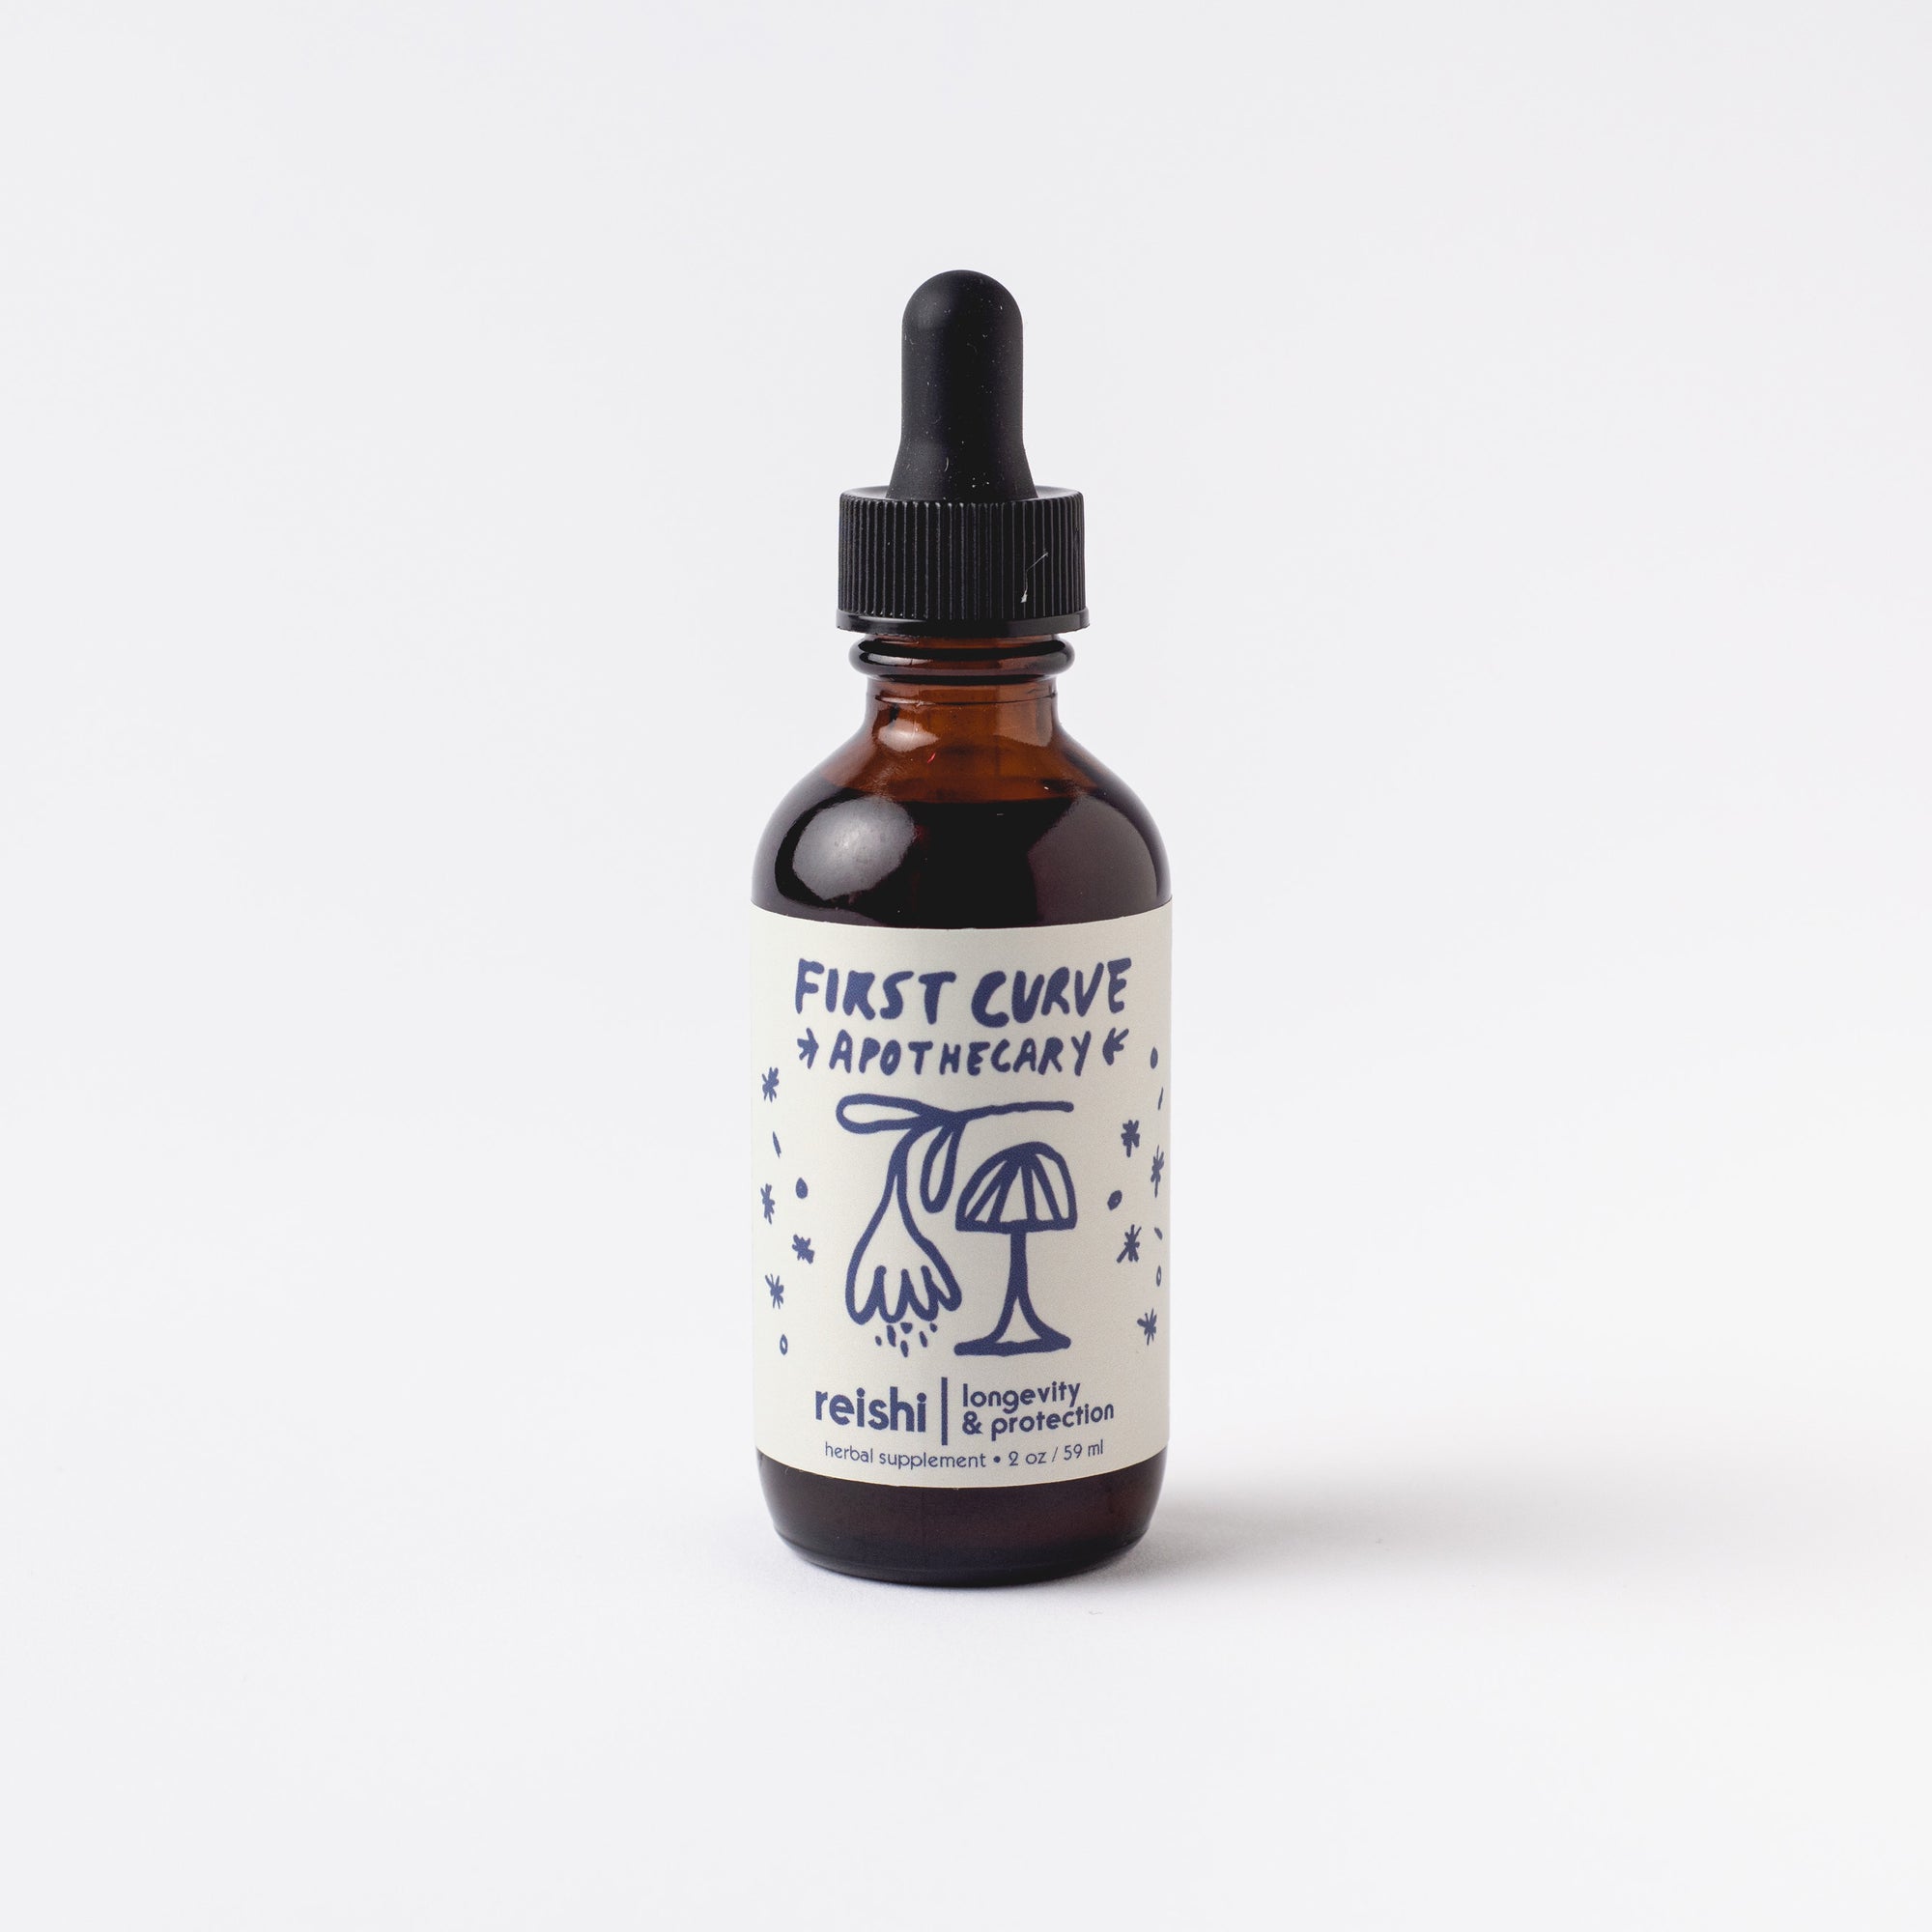 Liquid reishi mushroom extract from First Curve Apothecary